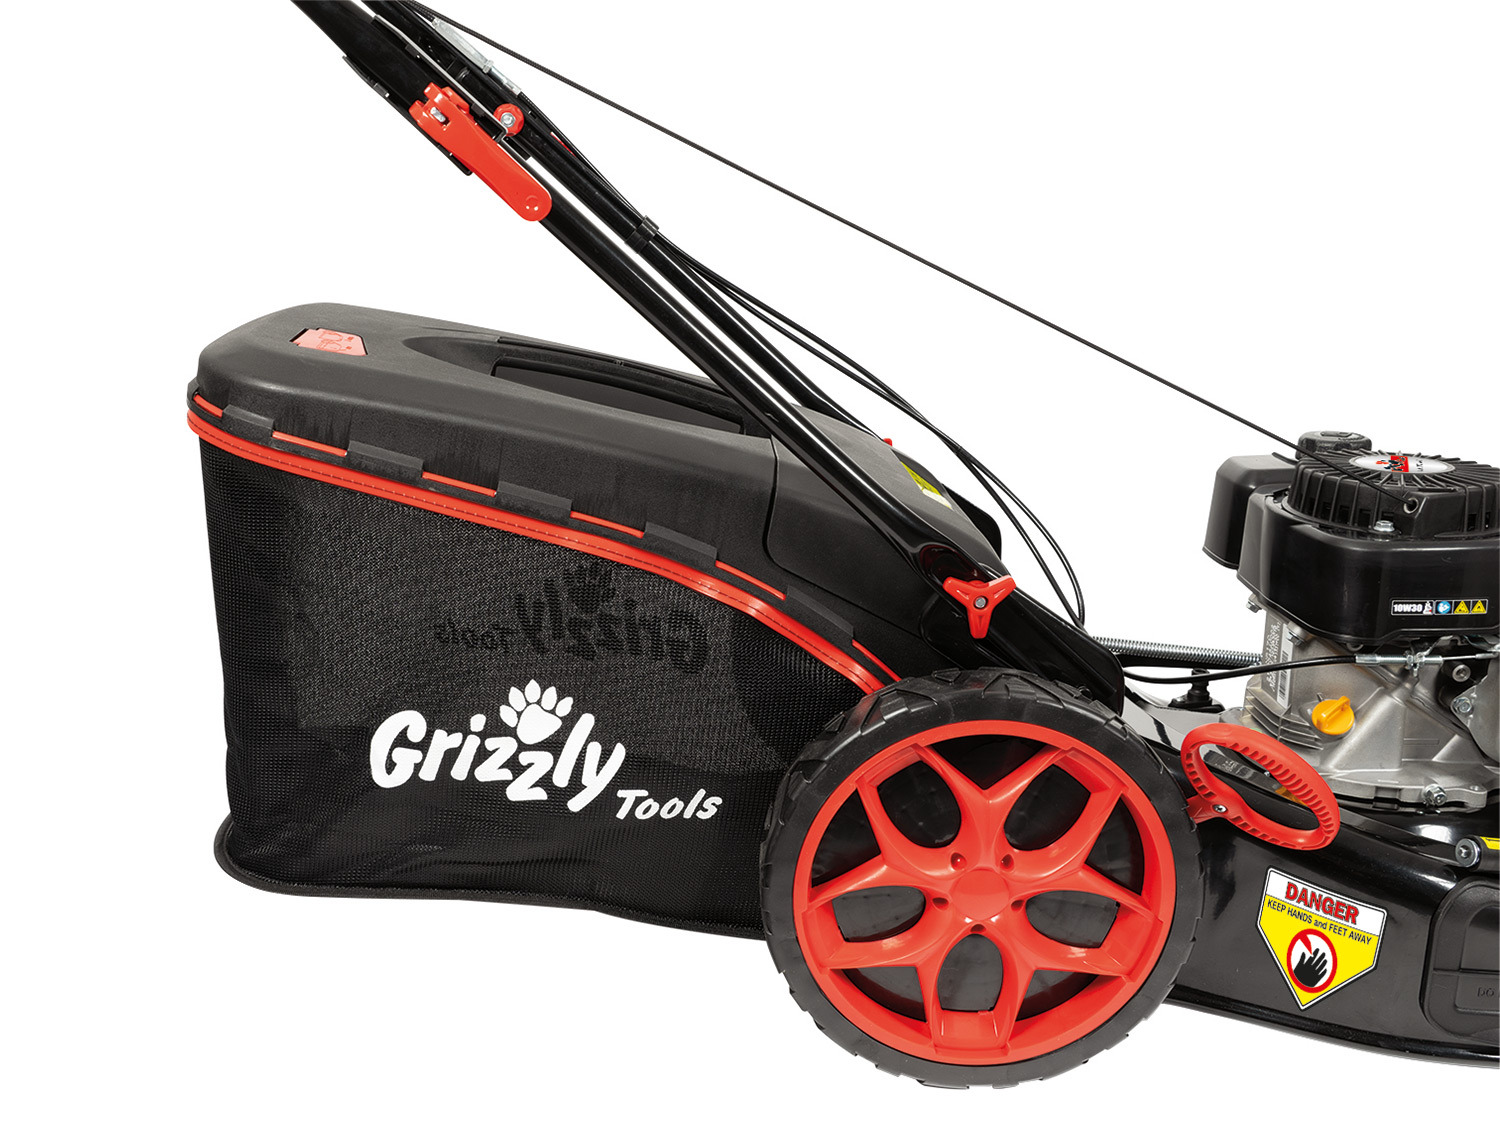 Grizzly 4in1 Benzinrasenmäher »BRM 5117-2 3,7 … PS, A«